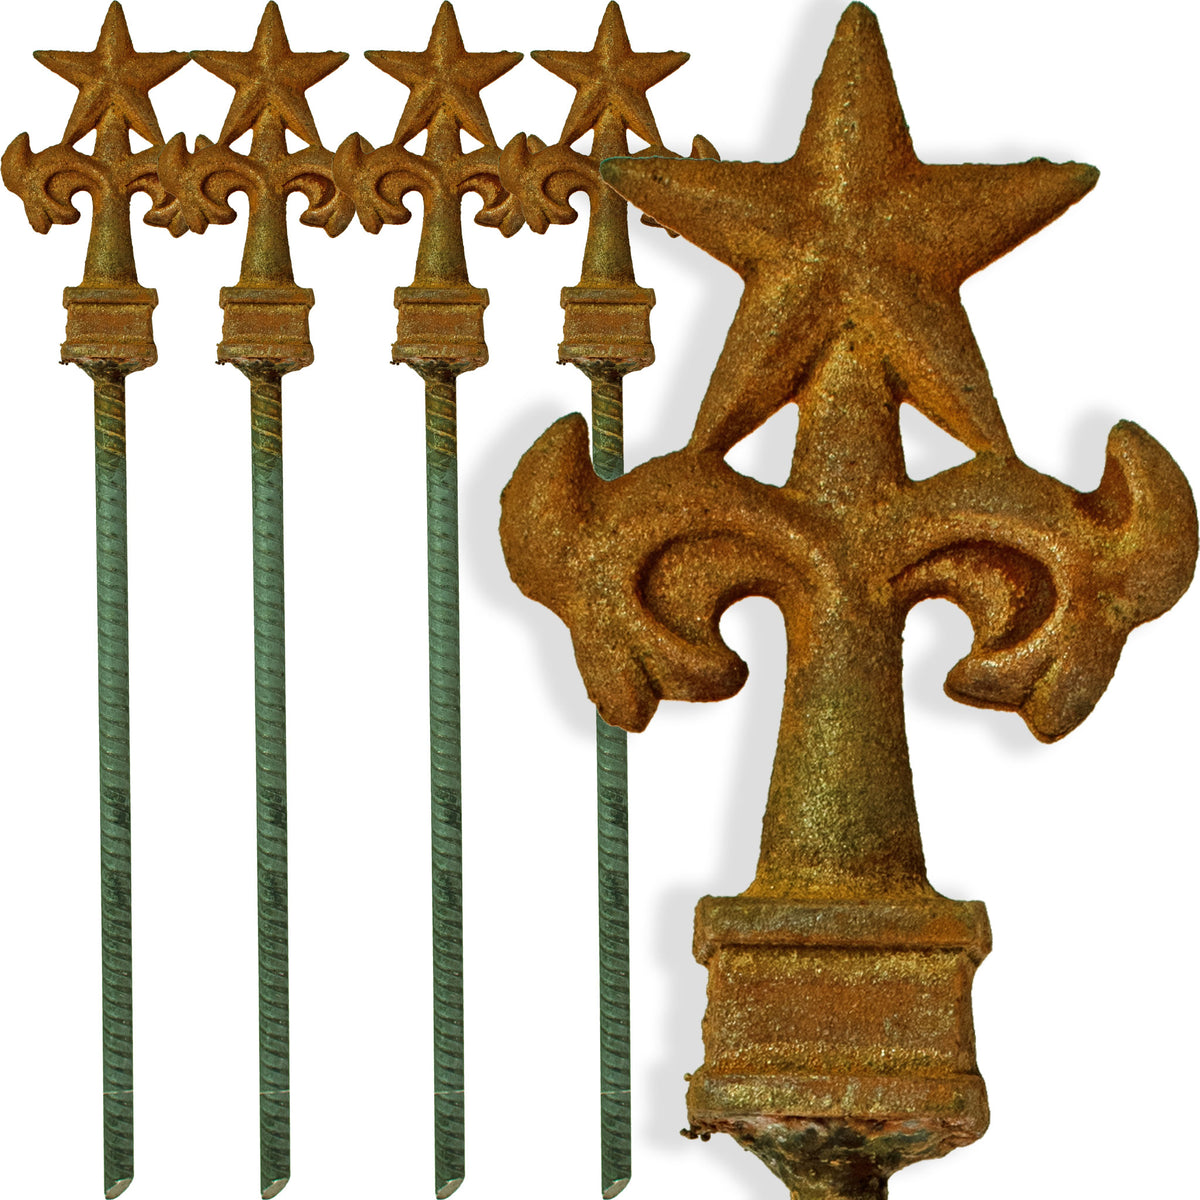 Introducing Lee Display's brand-new Garden Hose Stake Guides with the Texas Star Symbol sold in sets of 4.